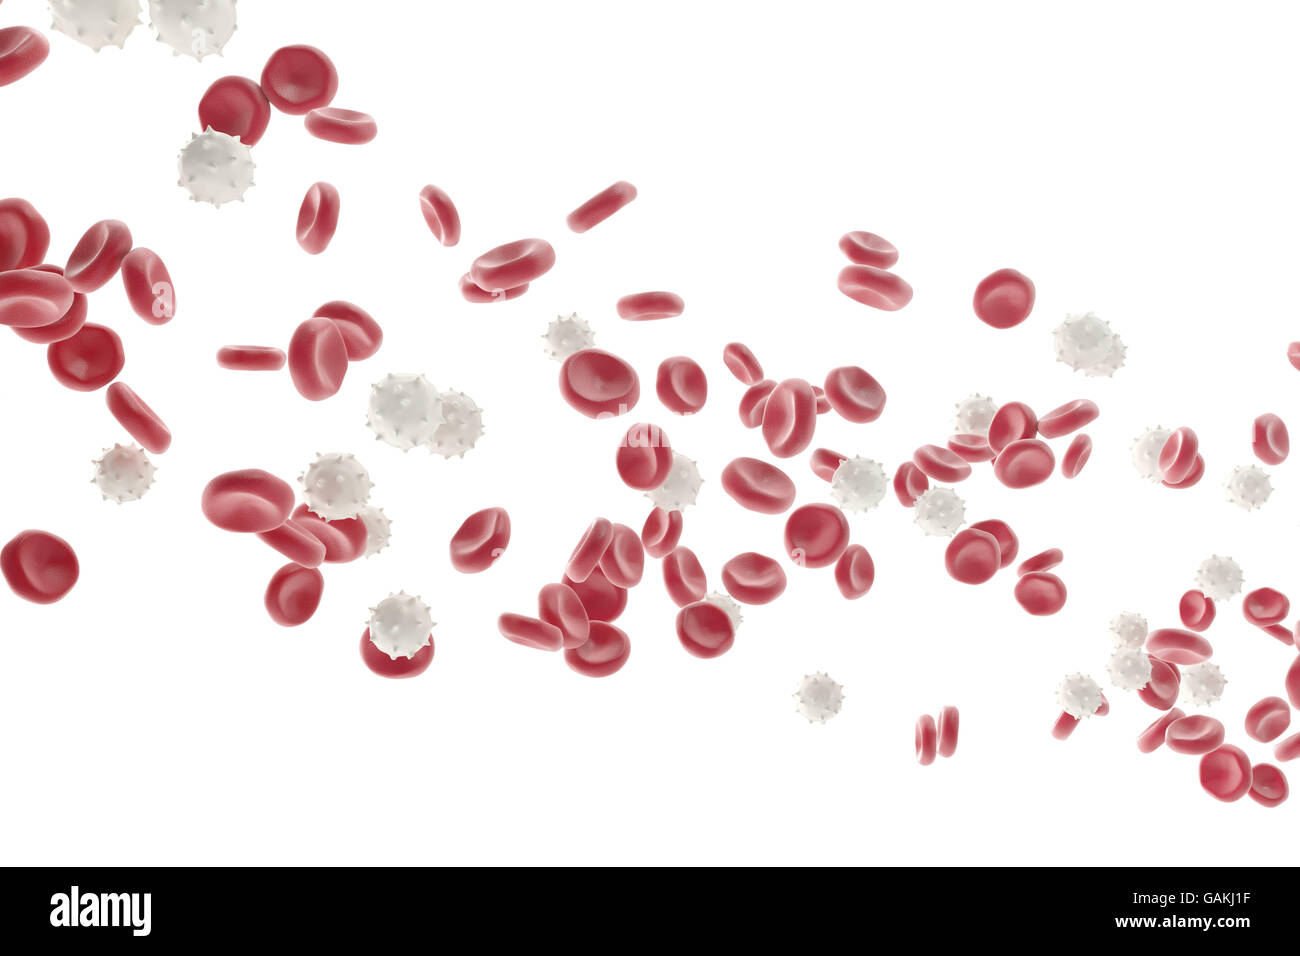 Red and white blood cells isolated on  background. Medical concept. 3d illustration Stock Photo